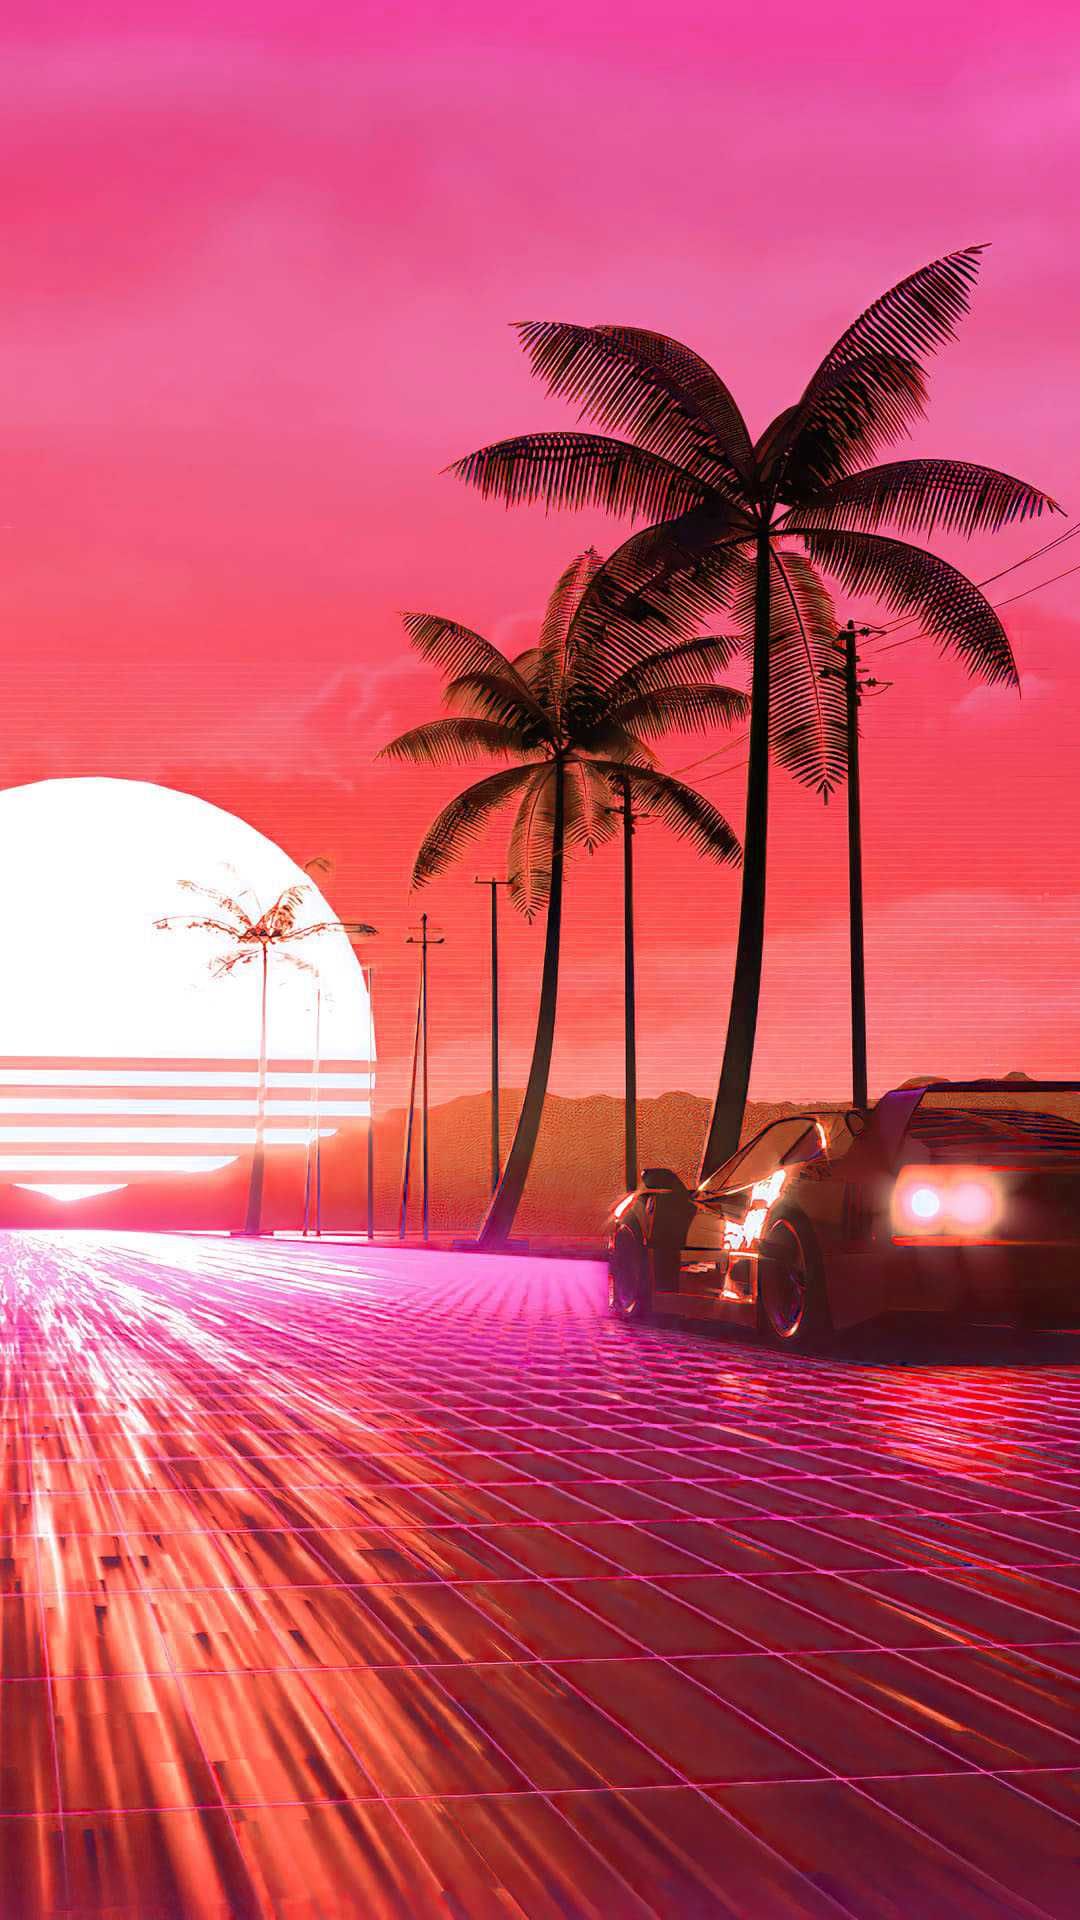 Vaporwave Wallpaper Browse Vaporwave Wallpaper with collections of Aesthetic, Anime, Depressing, iPhone, Minimal. Vaporwave wallpaper, Glitch wallpaper, Synthwave